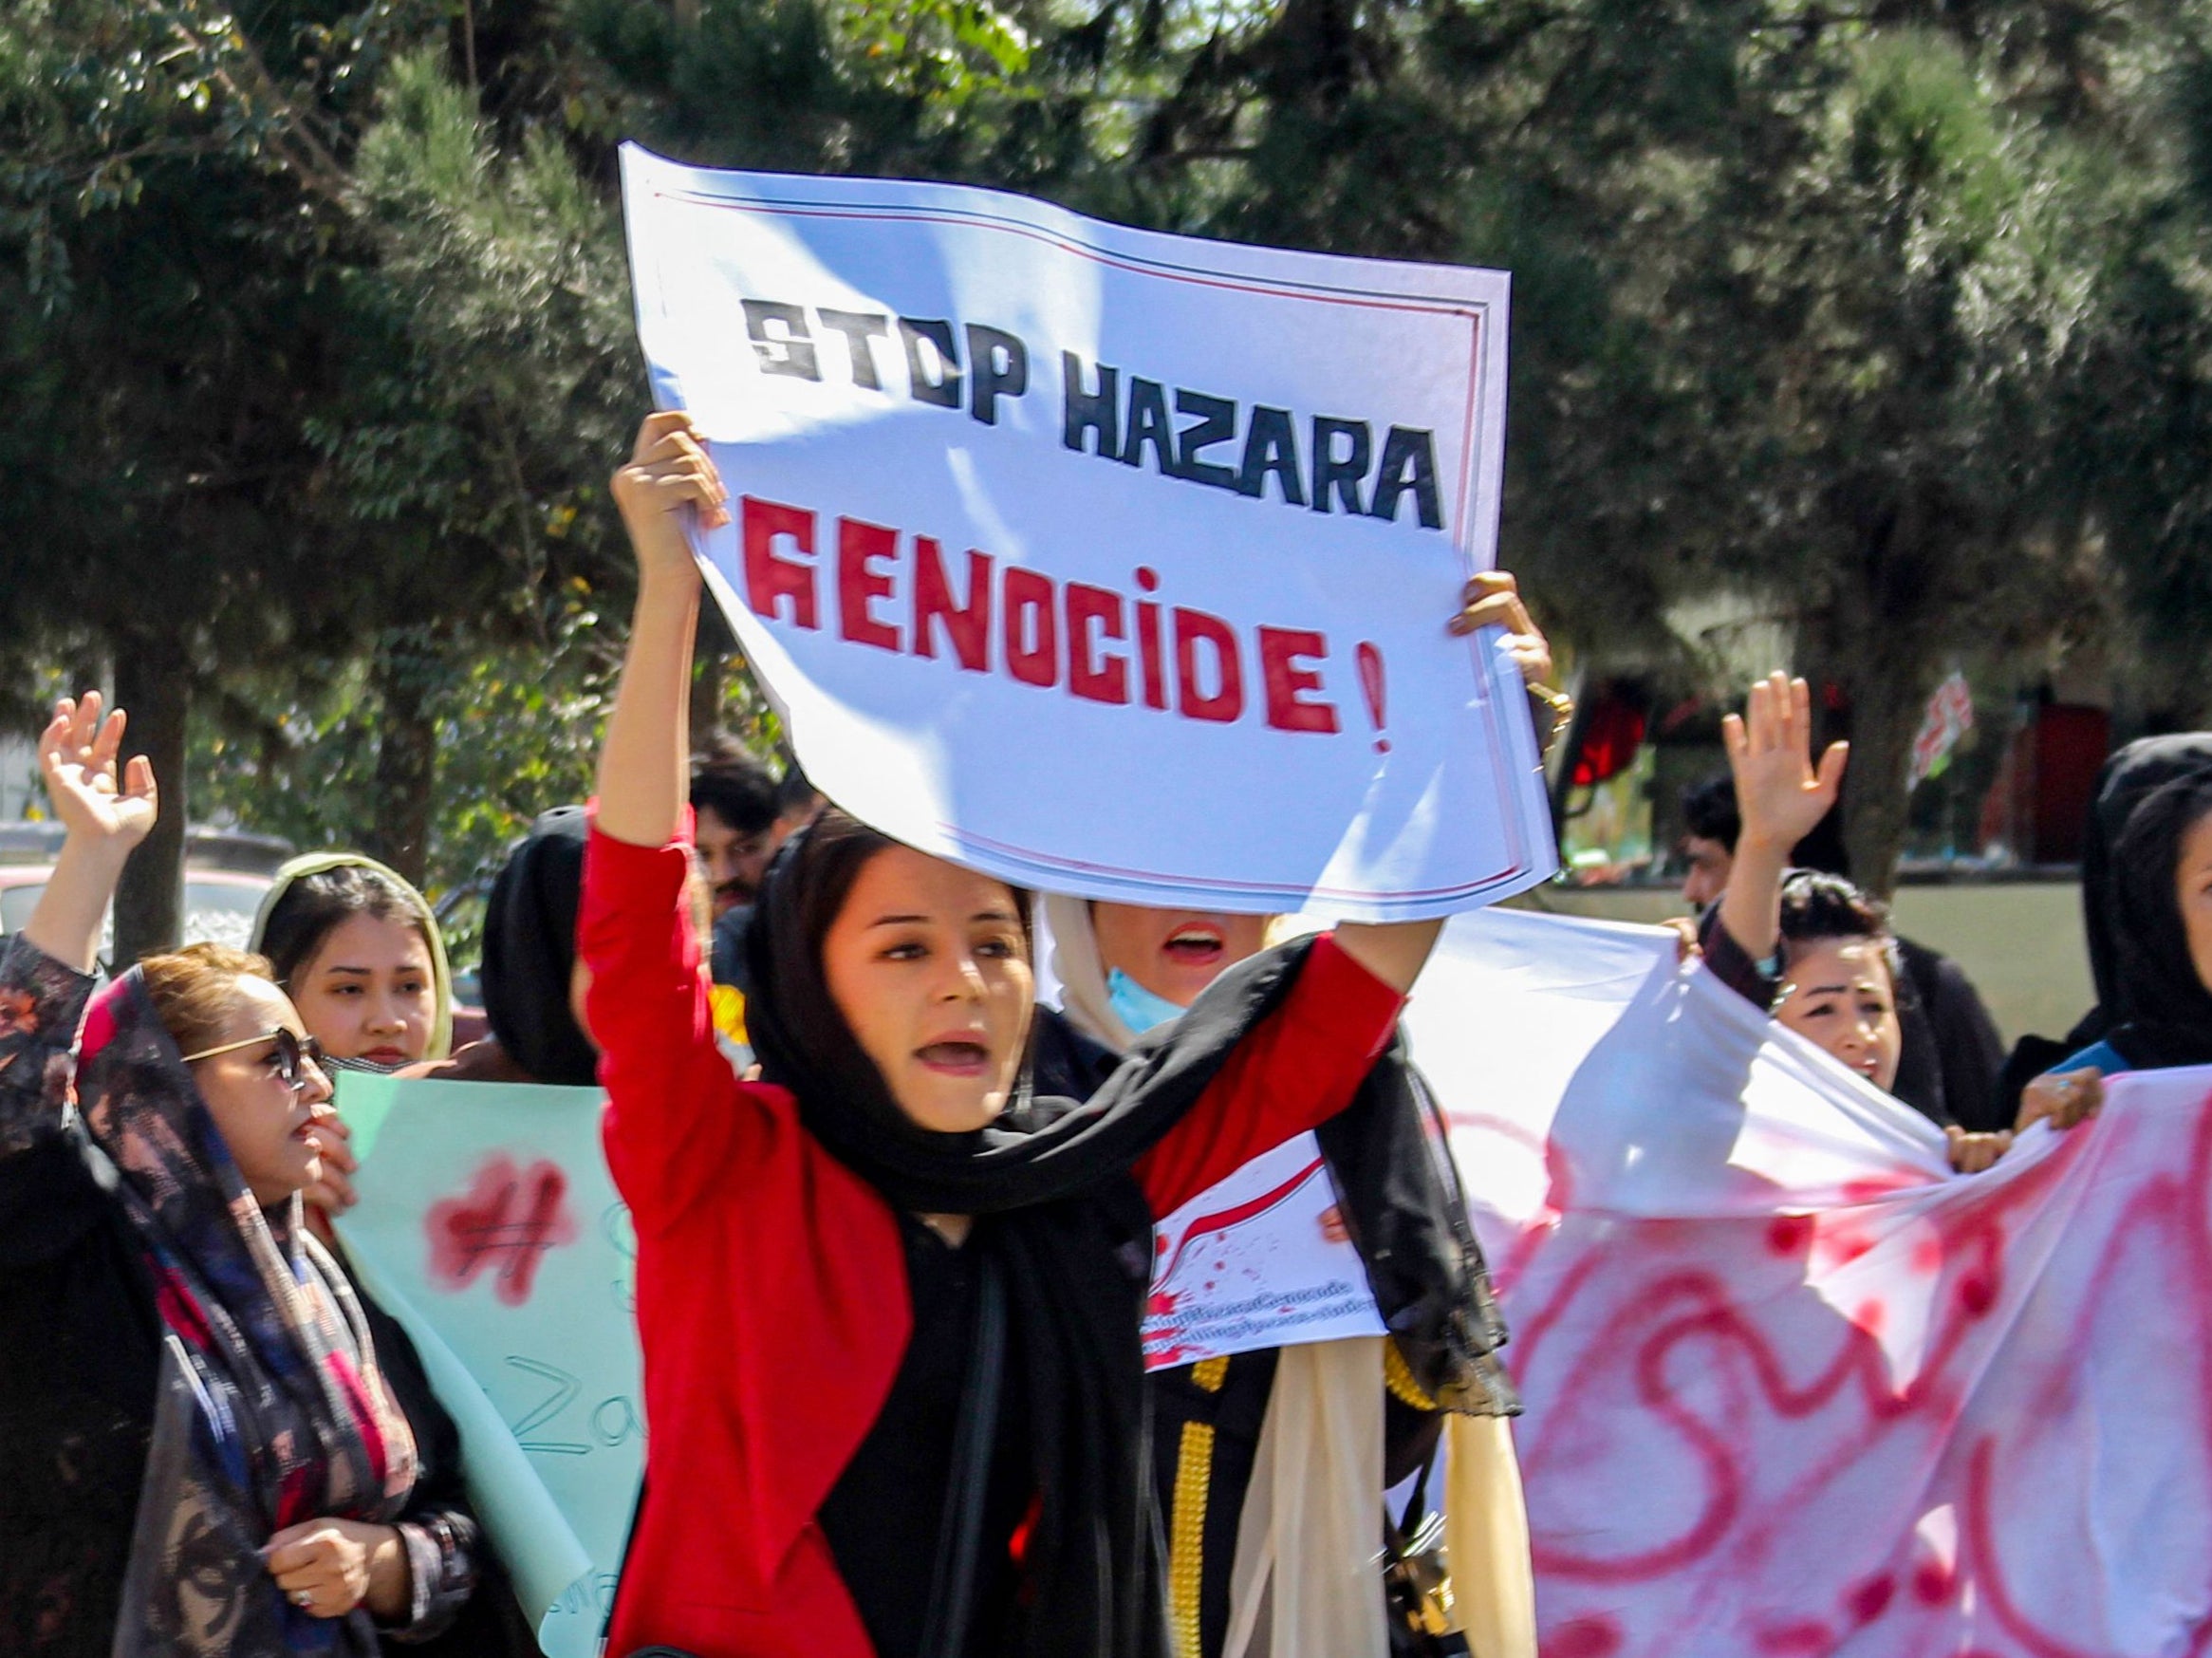 Afghan women display placards and chant slogans during a protest they call Stop Hazara genocide a day after a suicide bomb attack at Dasht-e-Barchi learning centre, in Kabul on October 1, 2022